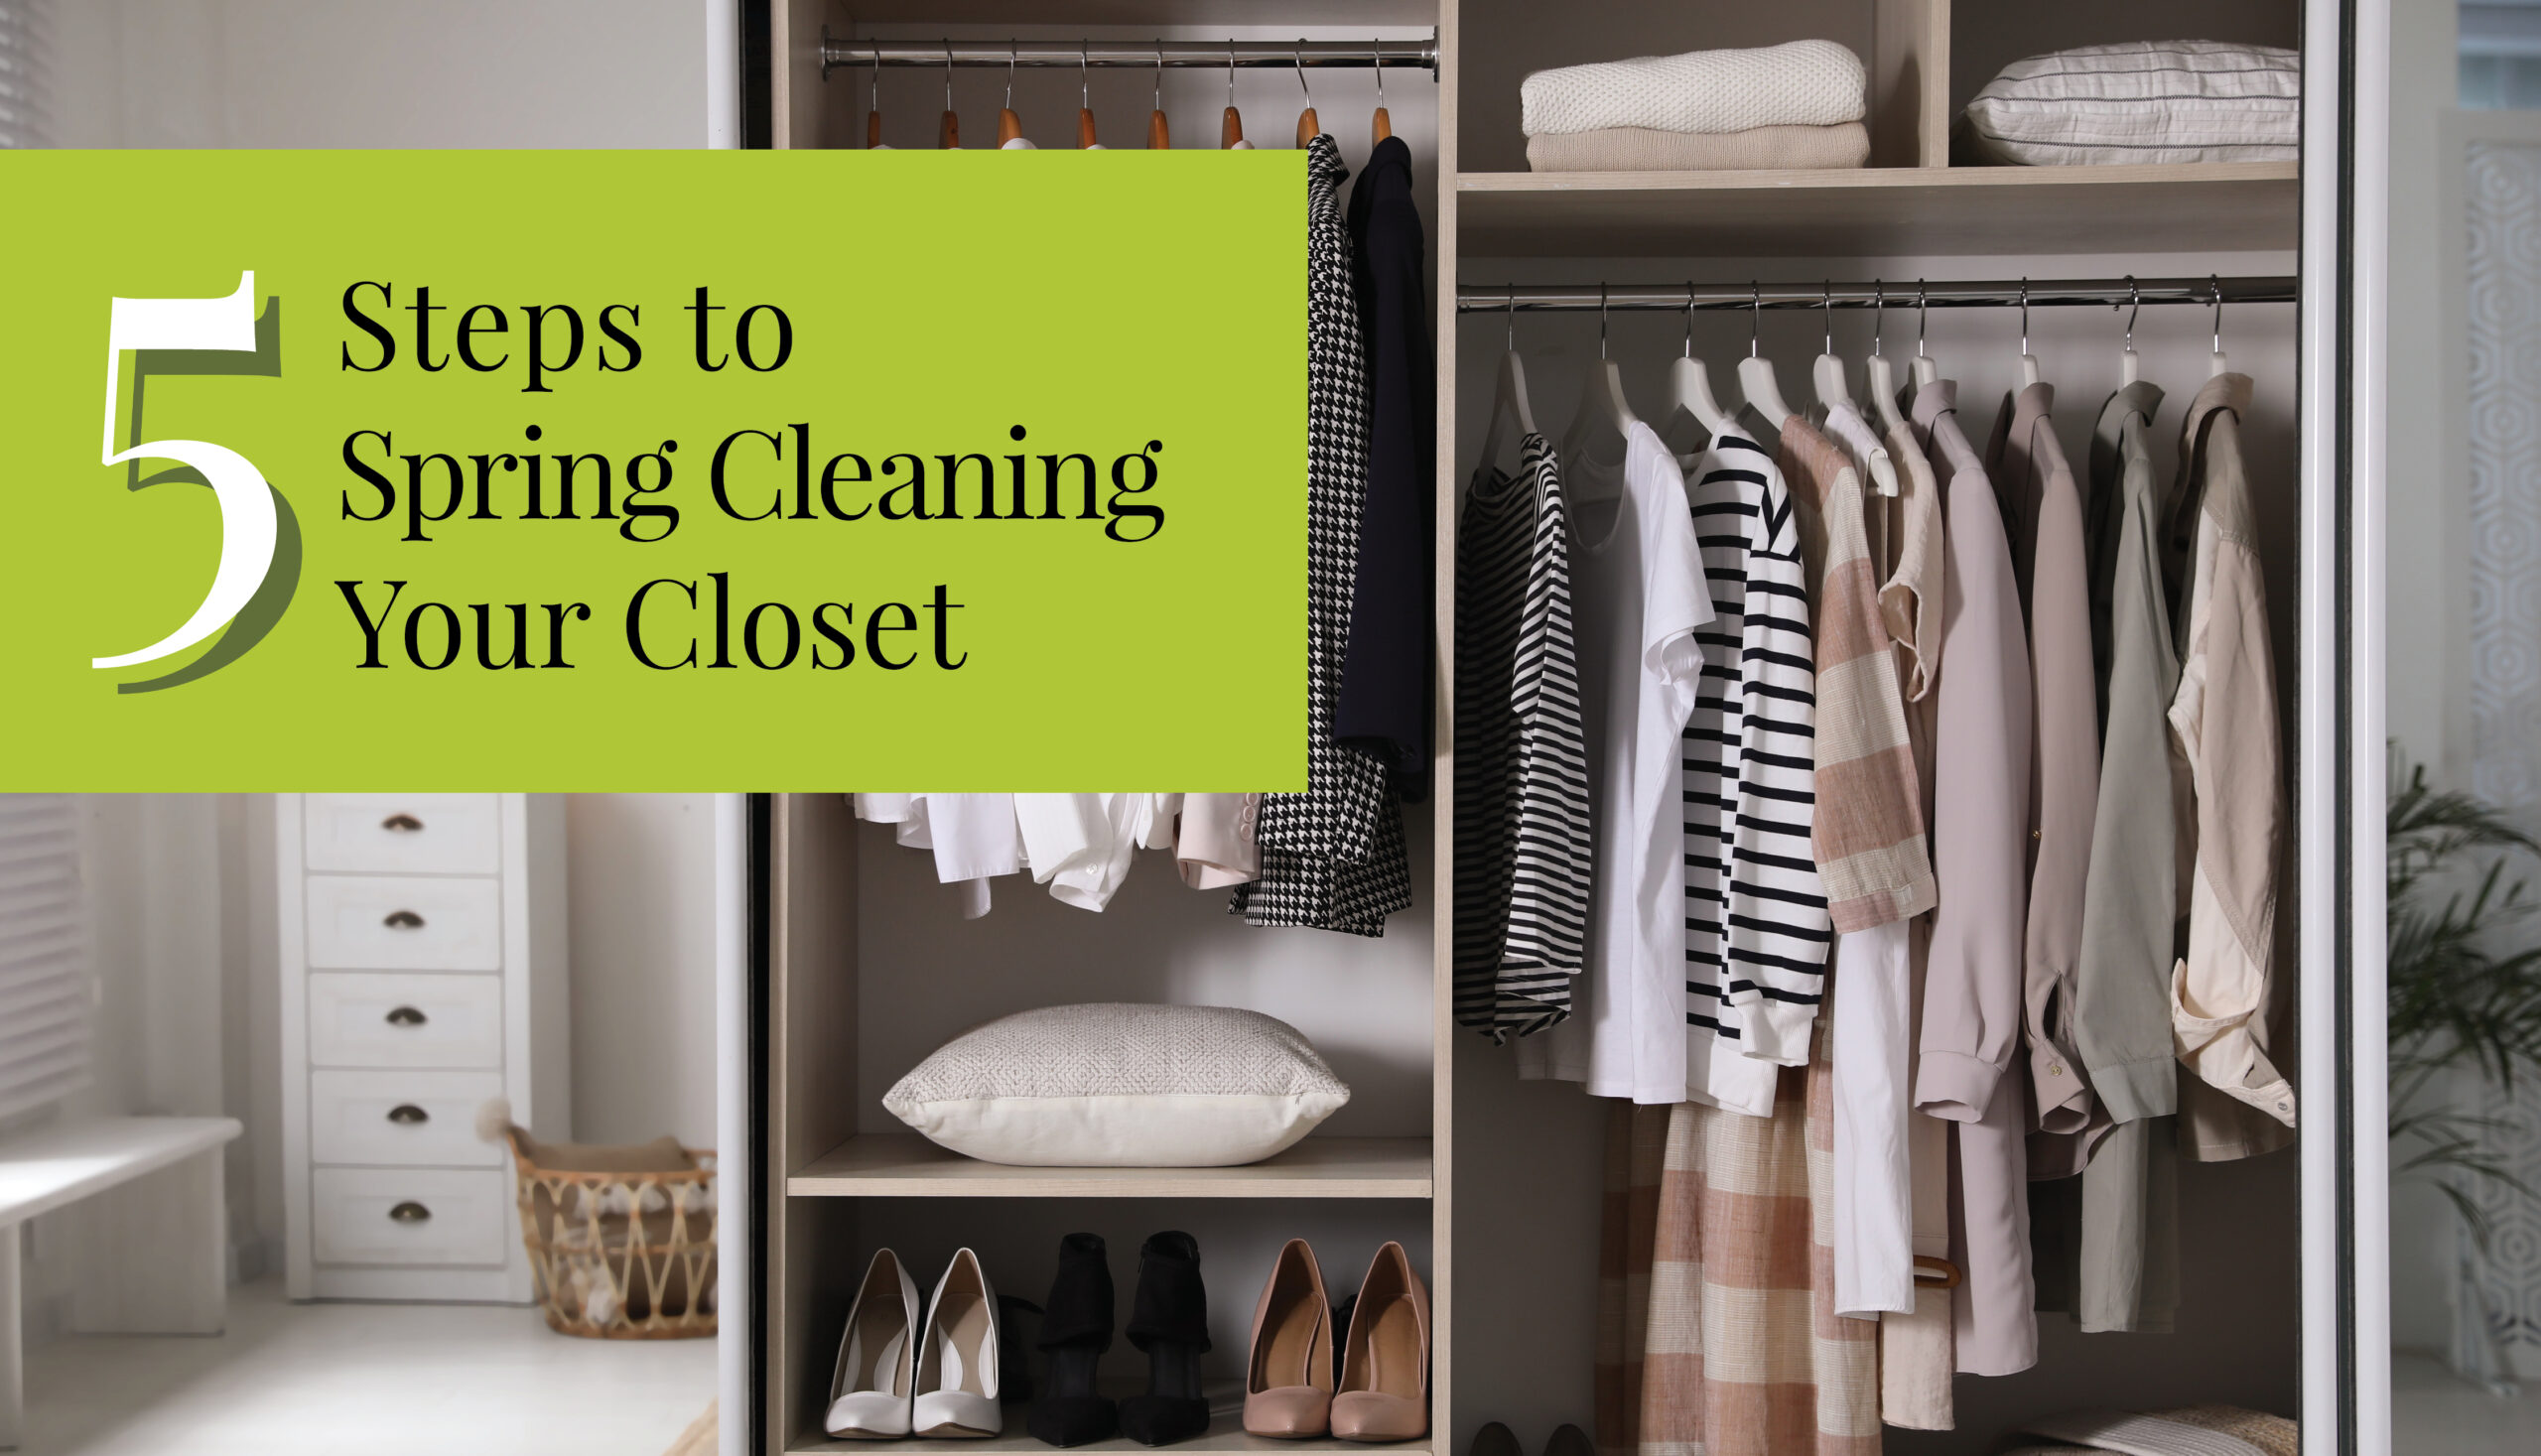 https://beaverlifemag.com/wp-content/uploads/2023/03/5-Steps-to-Spring-Cleaning-Your-Closet-scaled.jpg